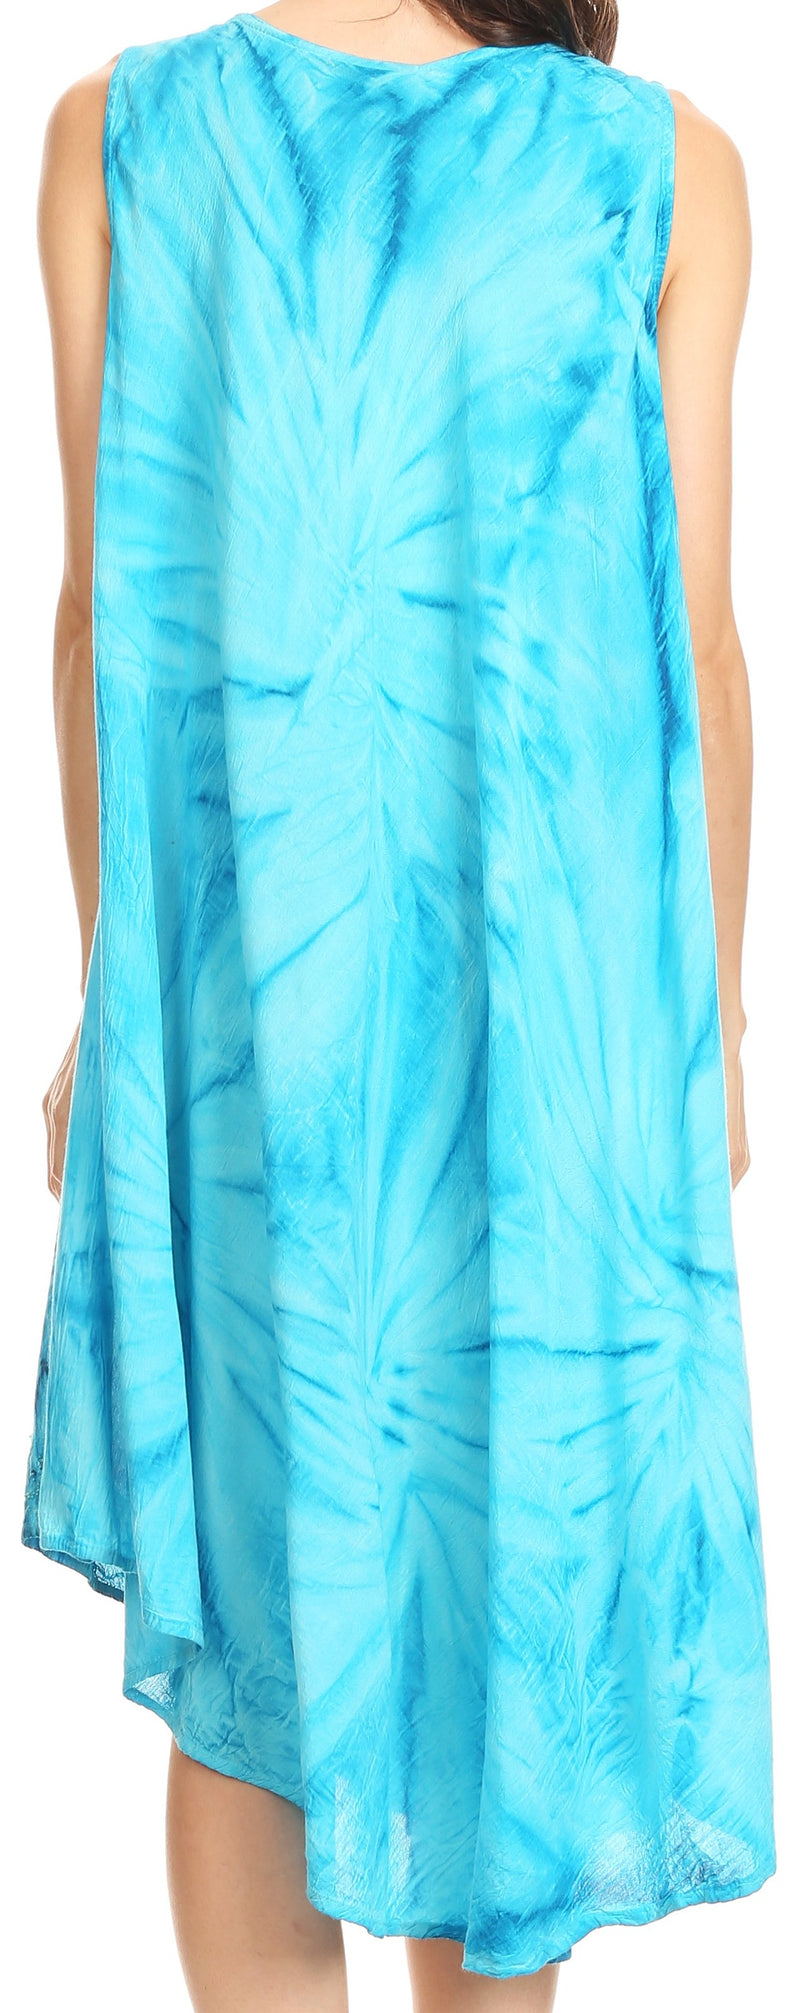 Sakkas Mariana Tie Dye Vine Print Dress / Cover Up with Sequins and Embroidery